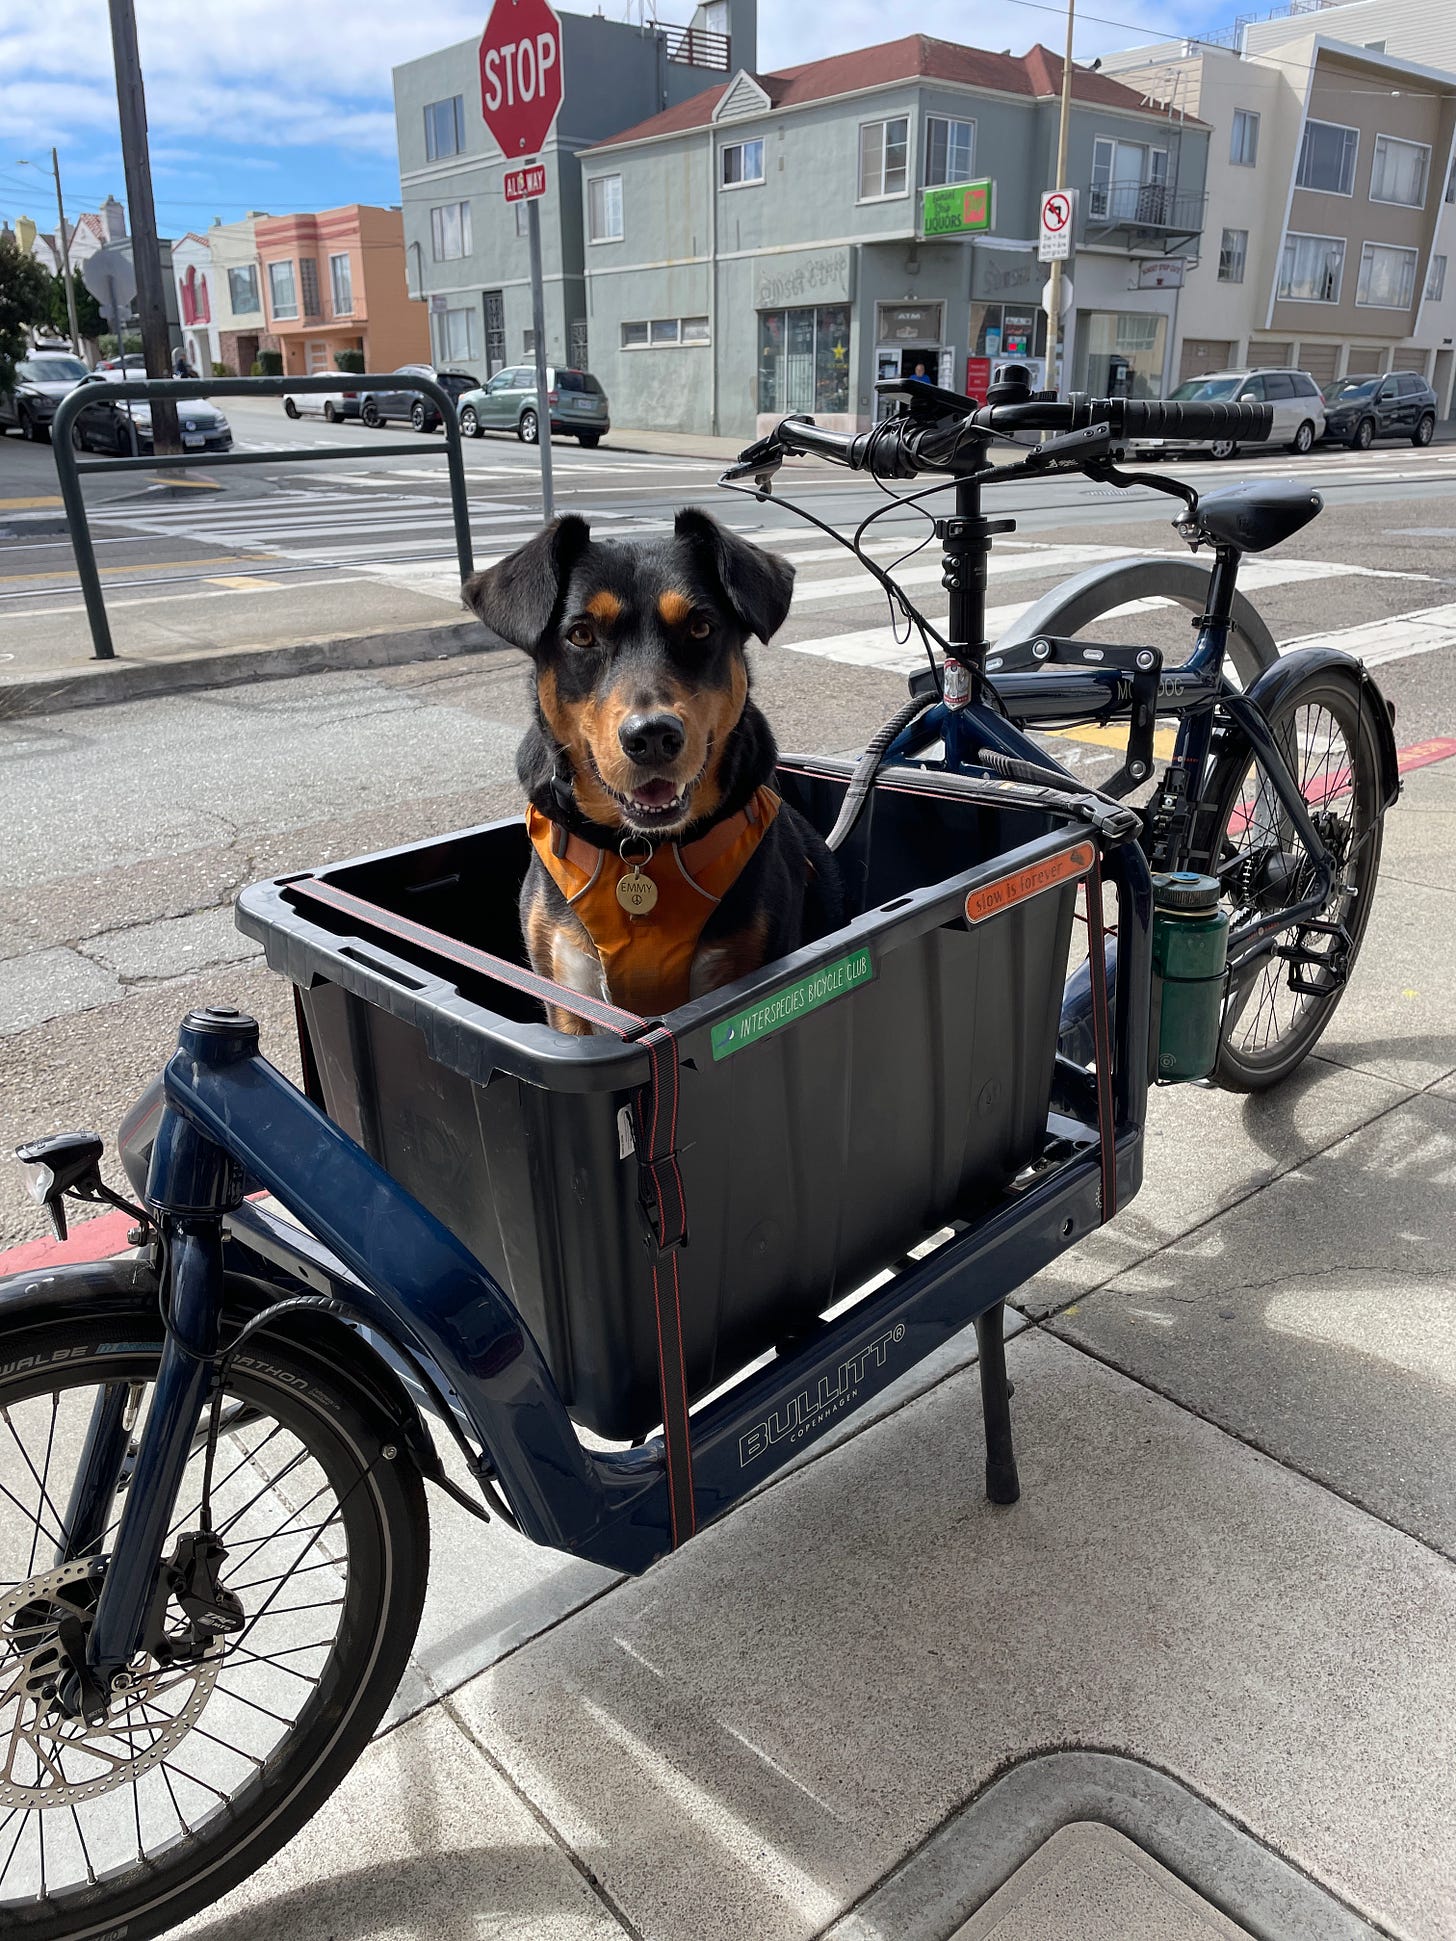 happy, medium-size dog in the front basket of a navy blue cargo bike, parked on a sidewalk in the city